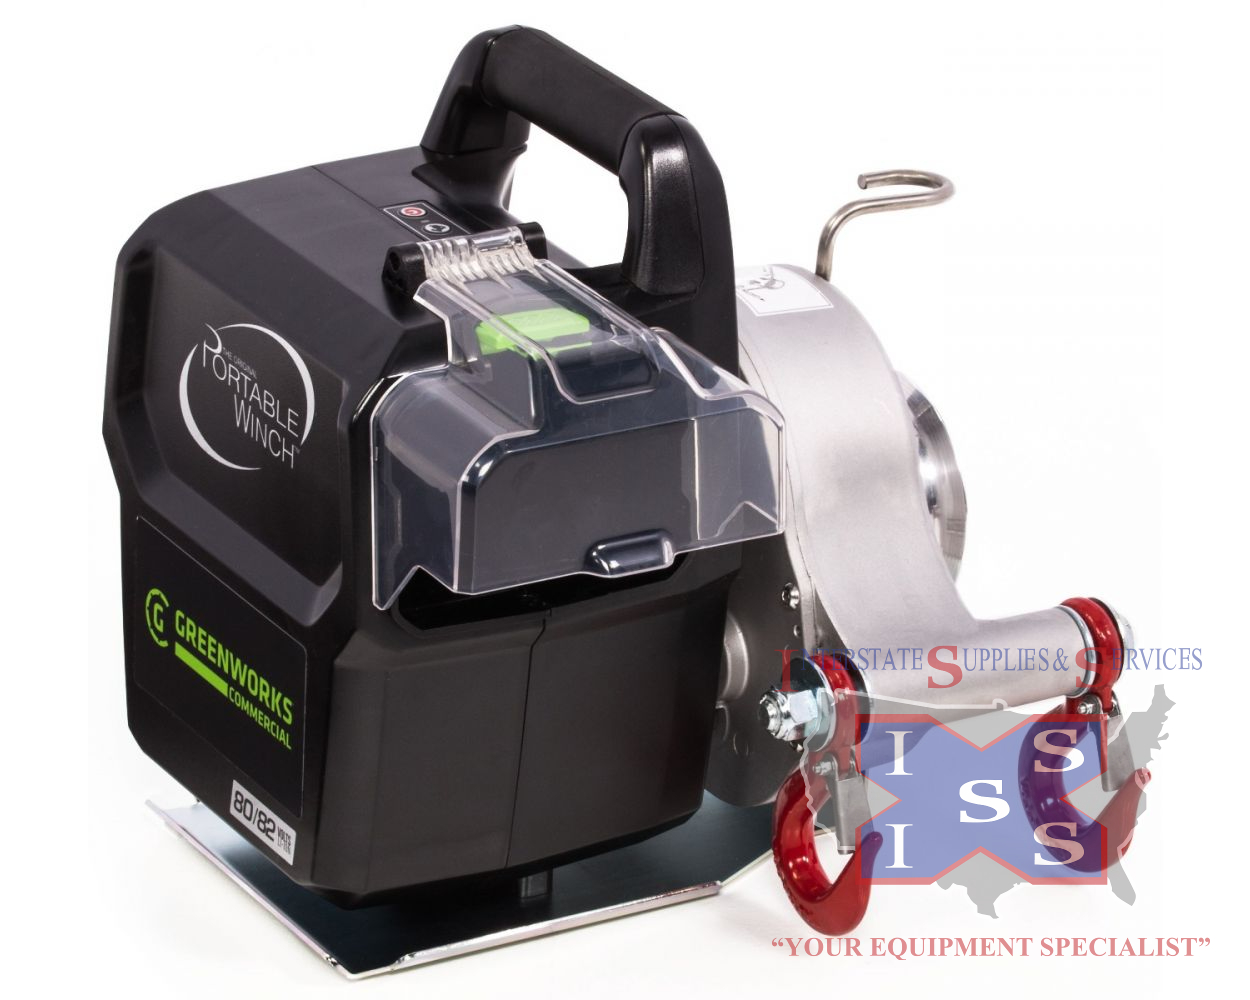 82W1 82-Volt Battery Powered Portable Winch (Tool Only)